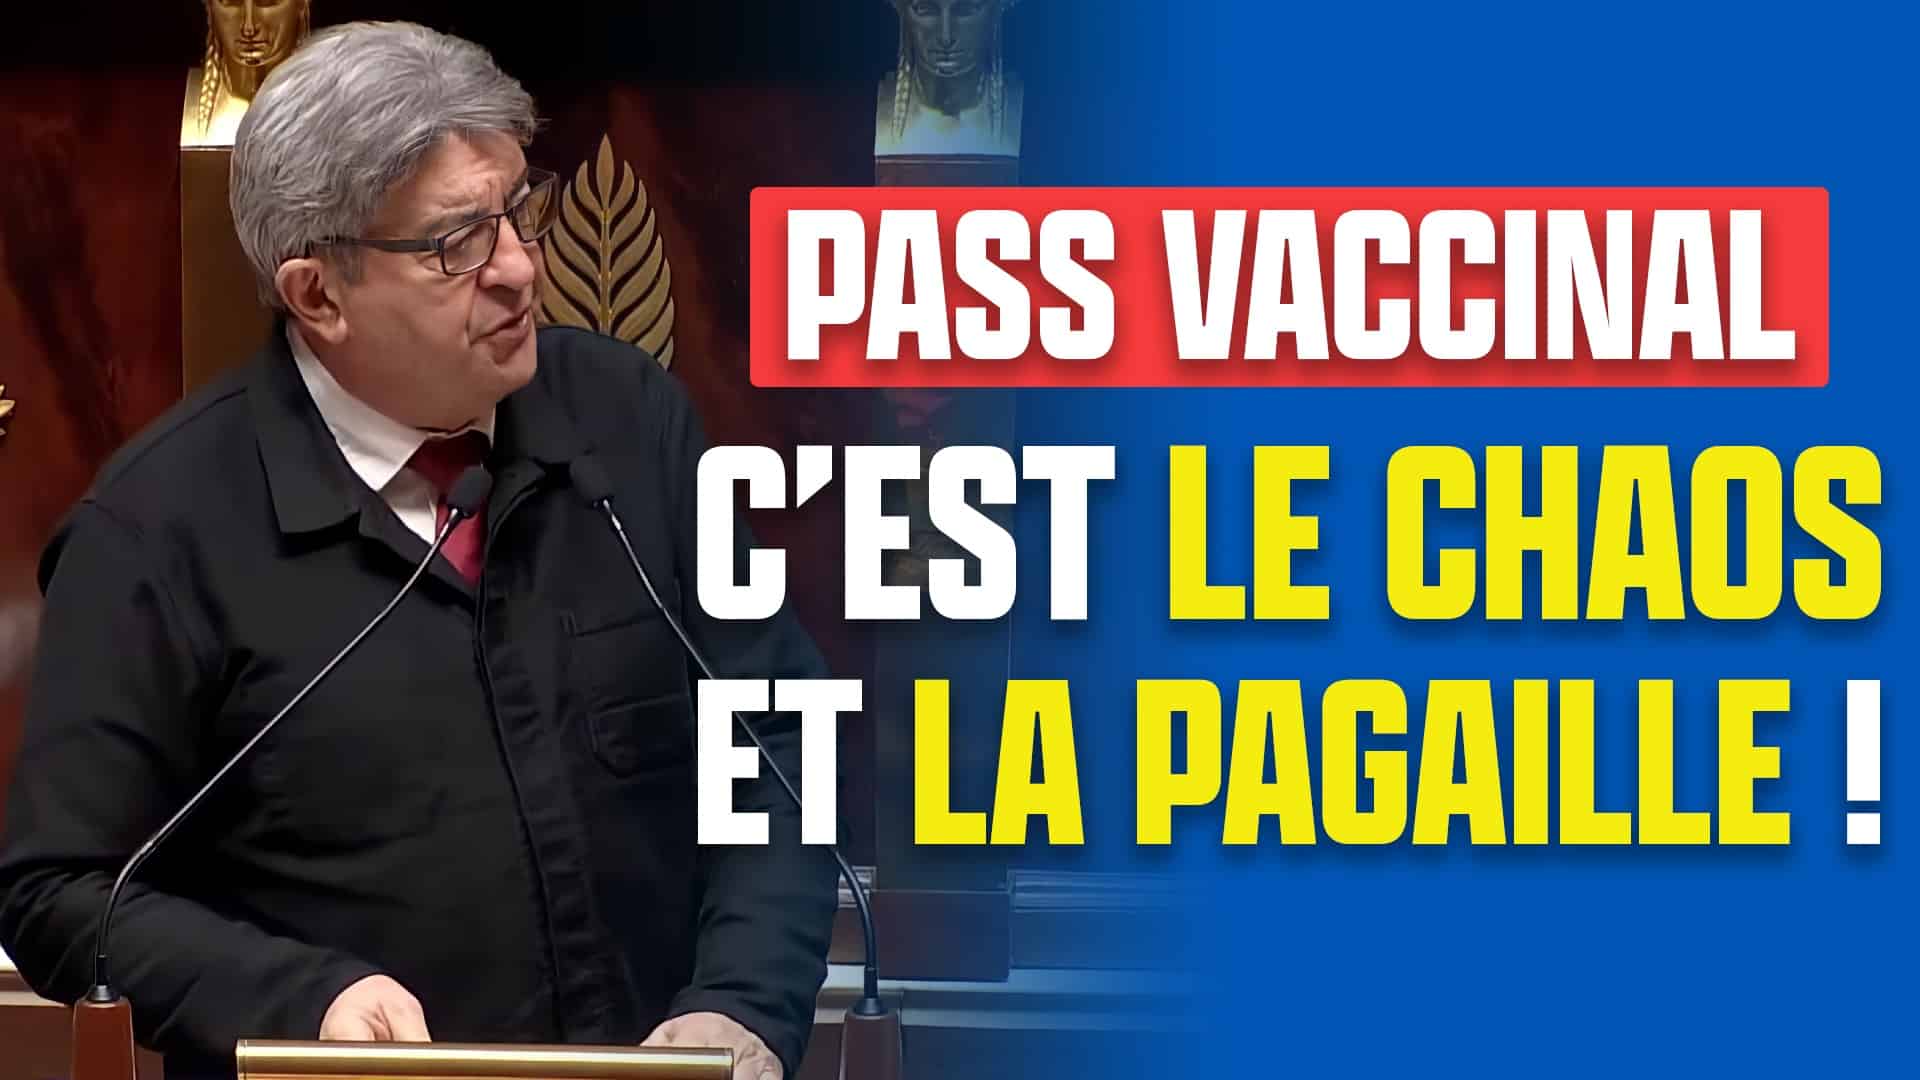 pass vaccinal chaos pagaille